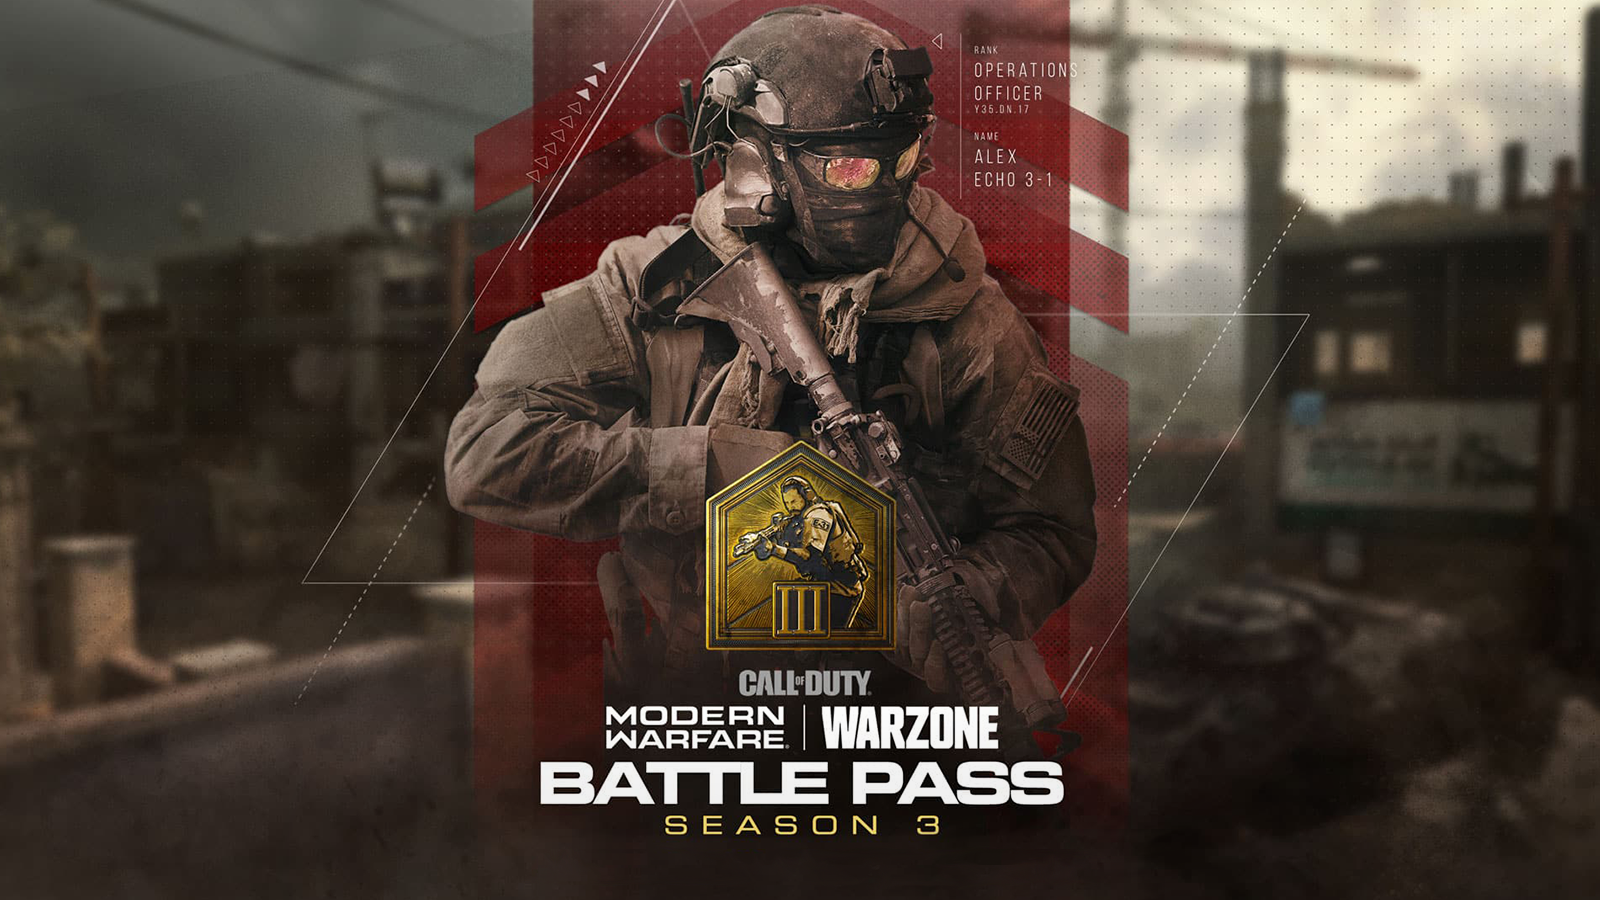 Introducing a New Battle Pass System in Call of Duty®: Modern